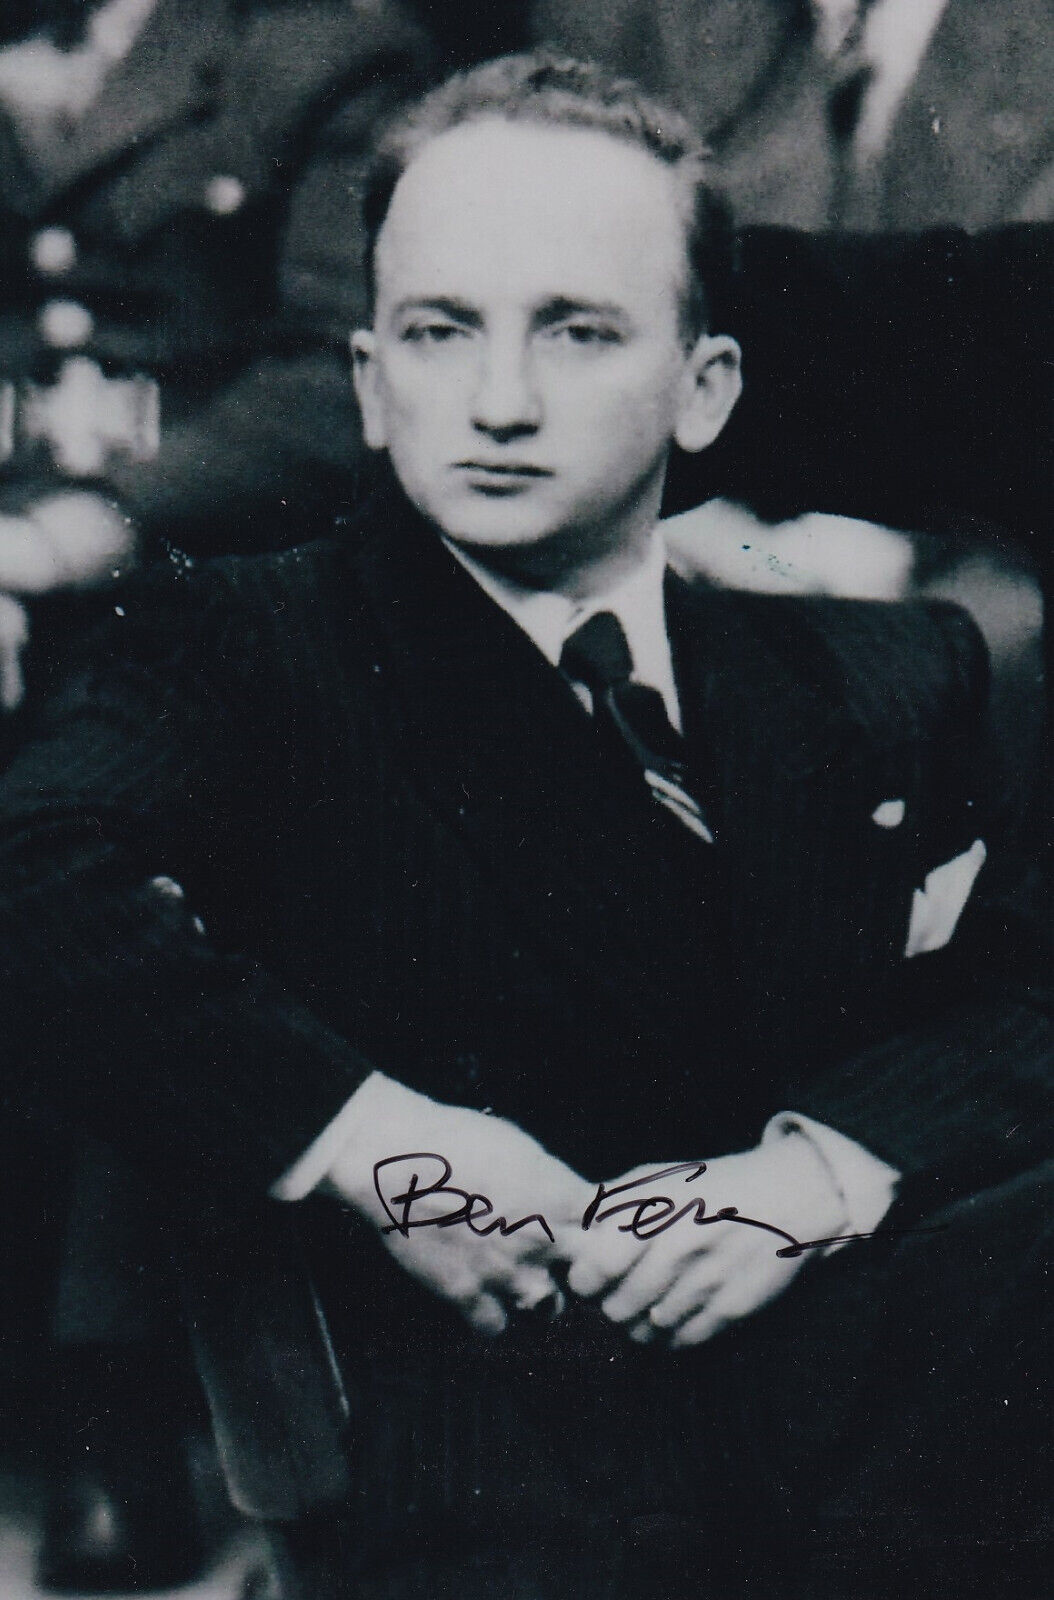 Sgt. Ben Ferencz Signed Autographed 4x6 Photo WWII Vet Nuremberg Prosecutor